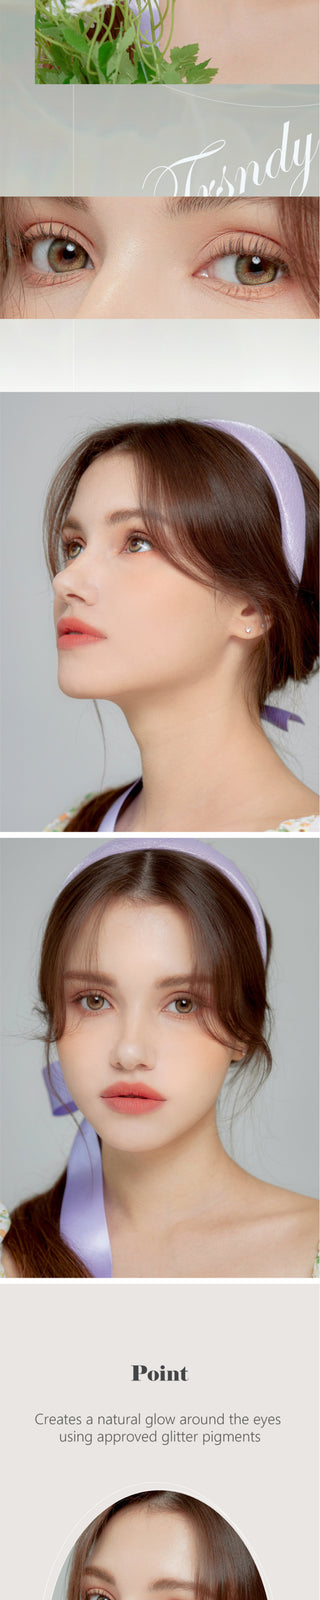 Several views of a Korean model with the Eyesm Winkly Luna Green color contact lenses. An enlargement of a model's eyes with the prescription colored contacts, demonstrating the subtle yet striking change on dark eyes.